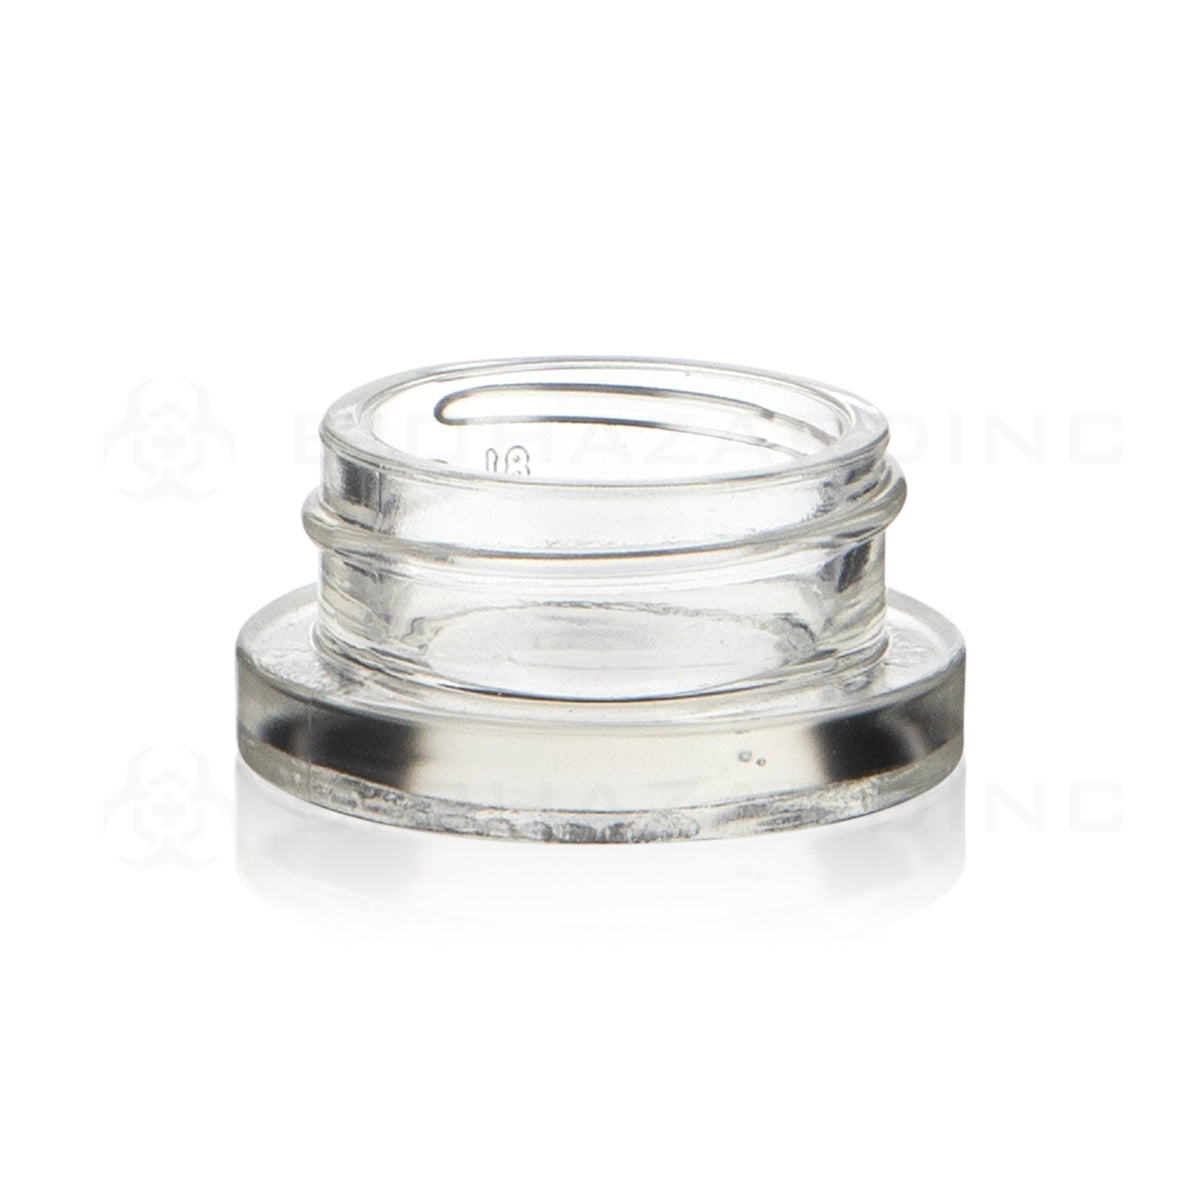 Concentrate Containers | Glass Concentrate Jars - Clear | 38mm - 9mL - 80 Count Concentrate Container Biohazard Inc   